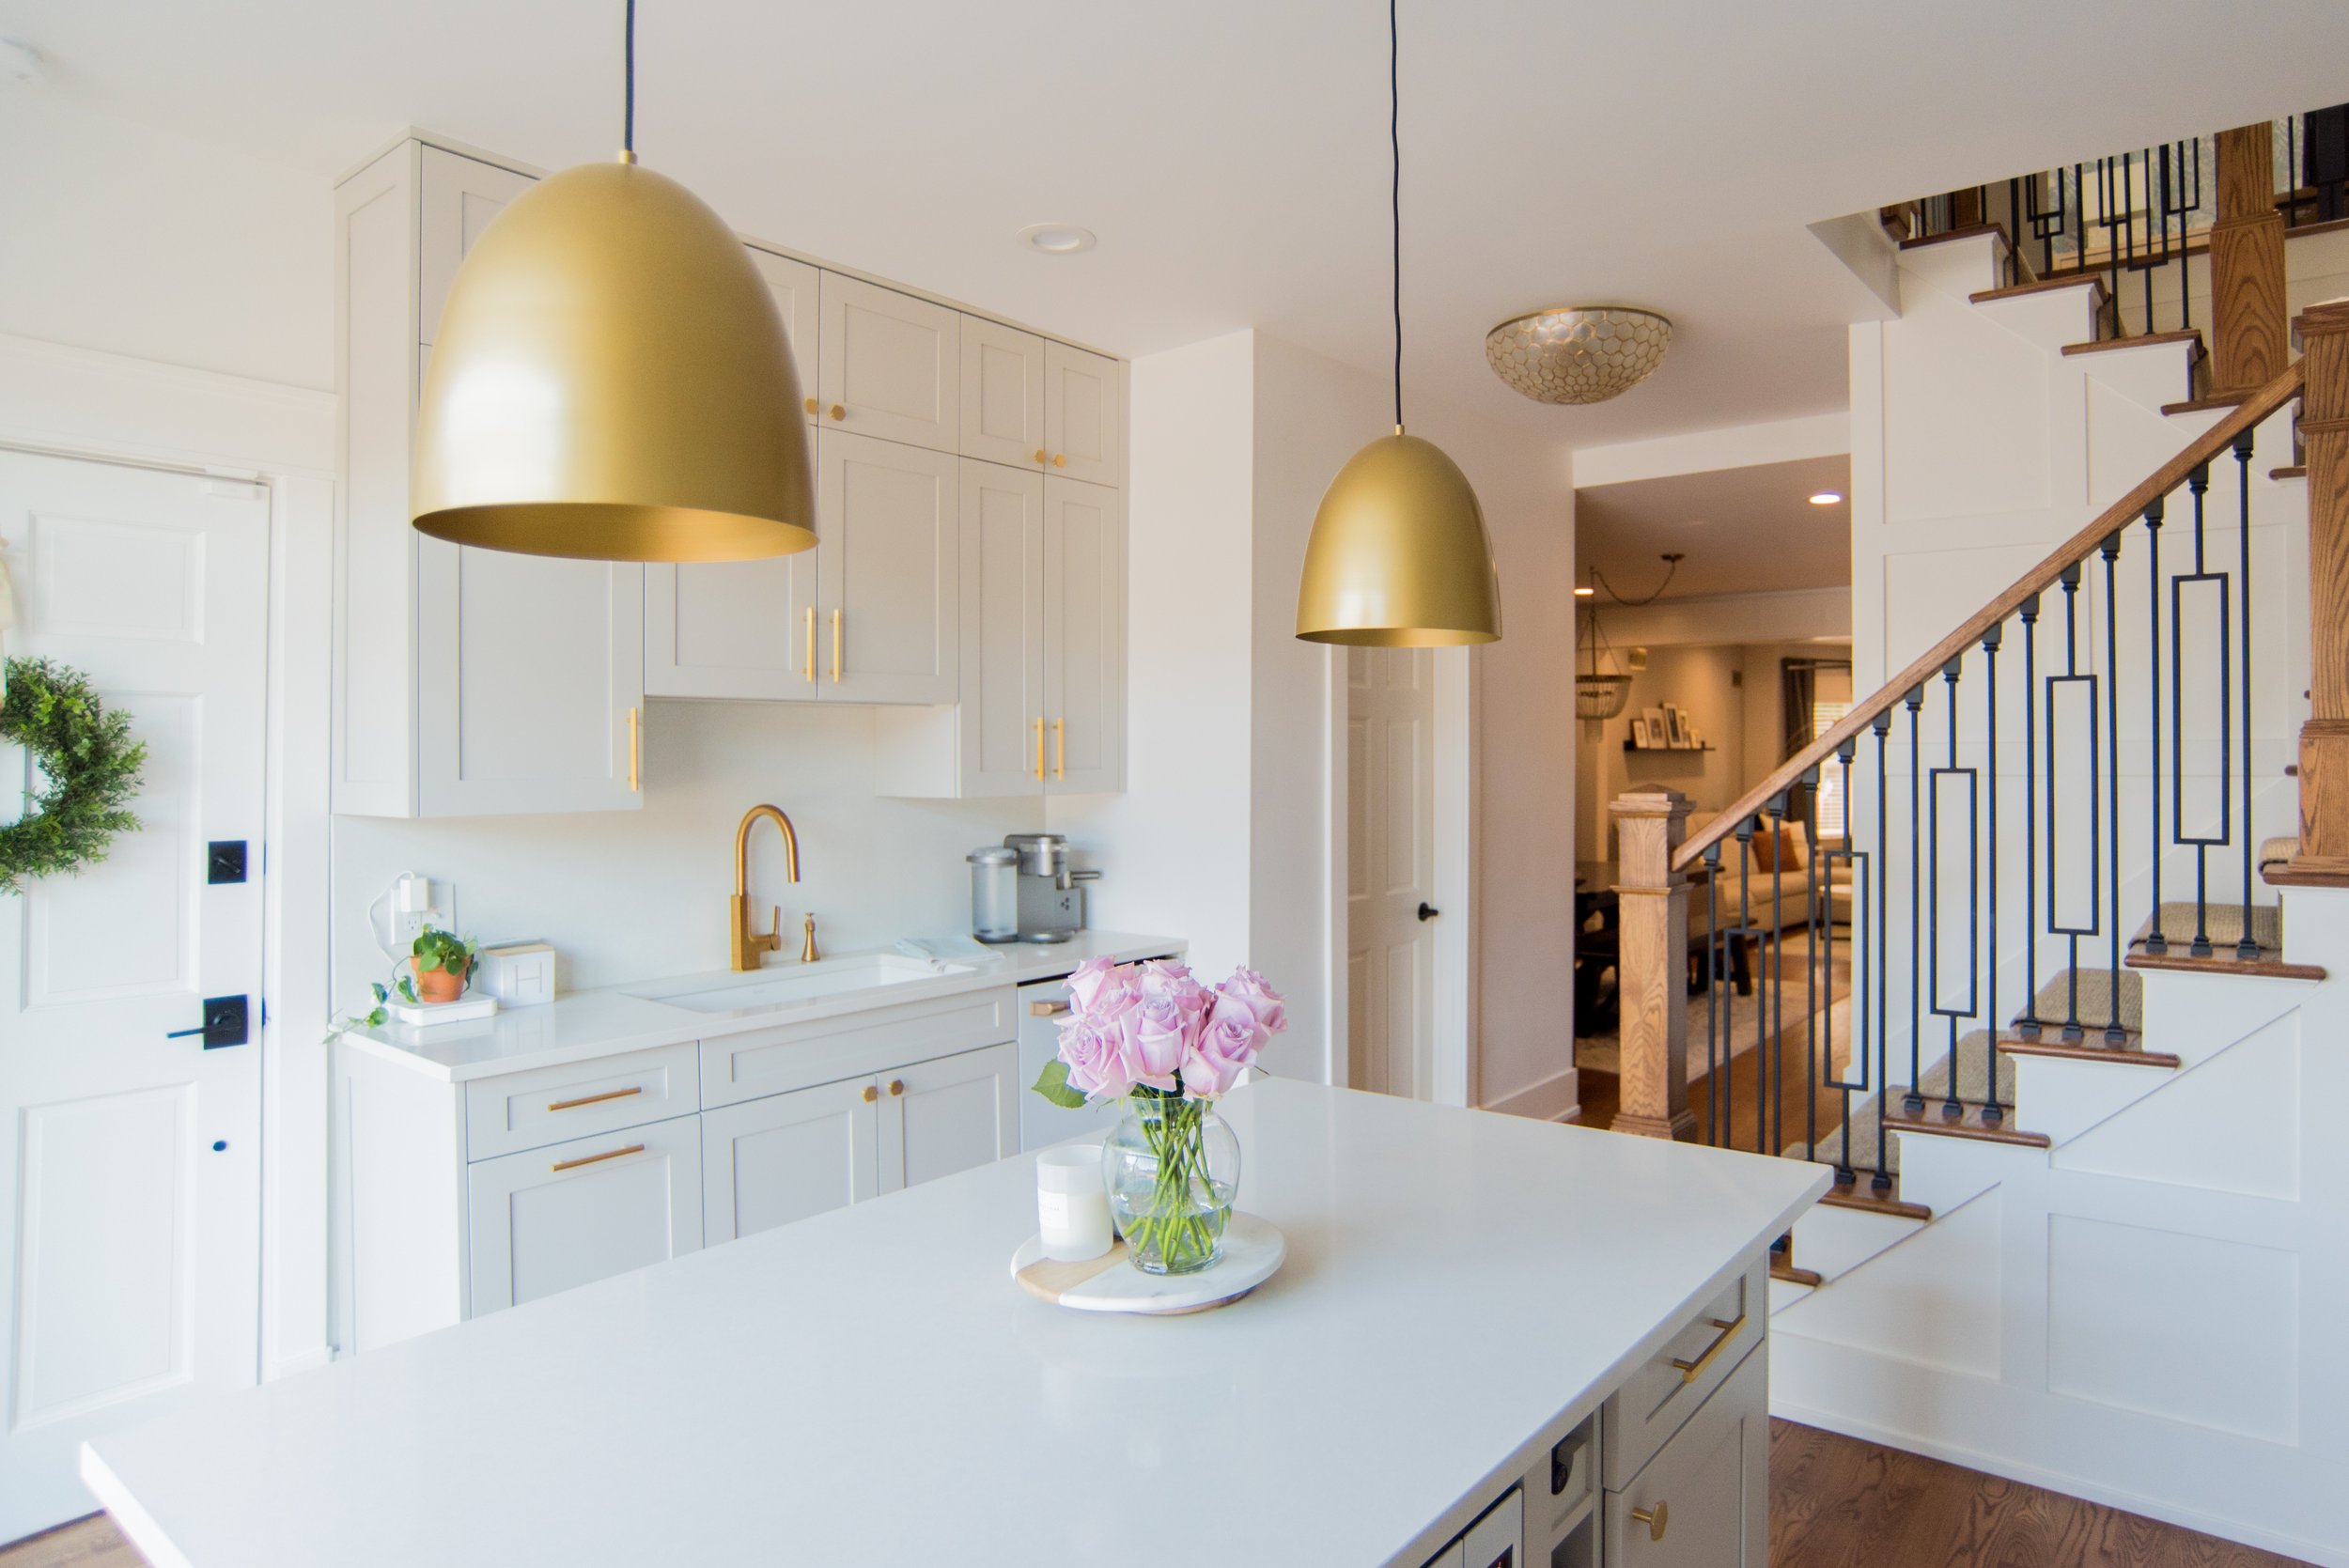 kitchen island with gold lamps and gold kitchen accents